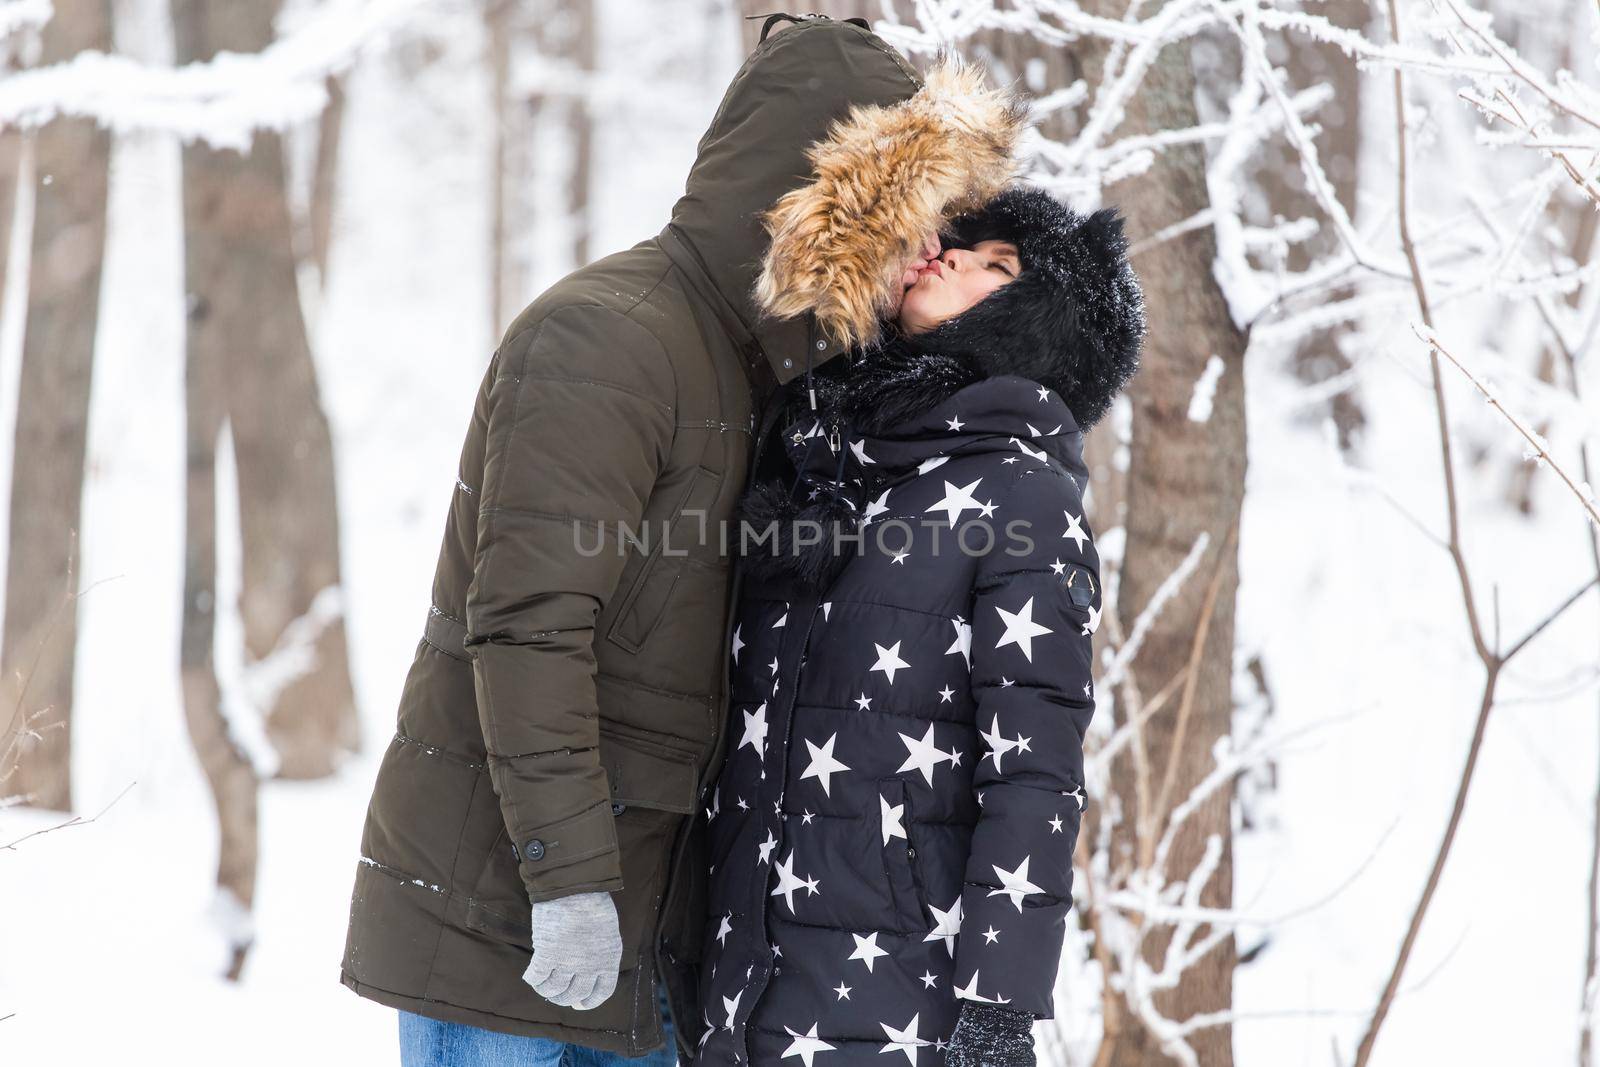 Young couple walking in a snowy park. Winter season